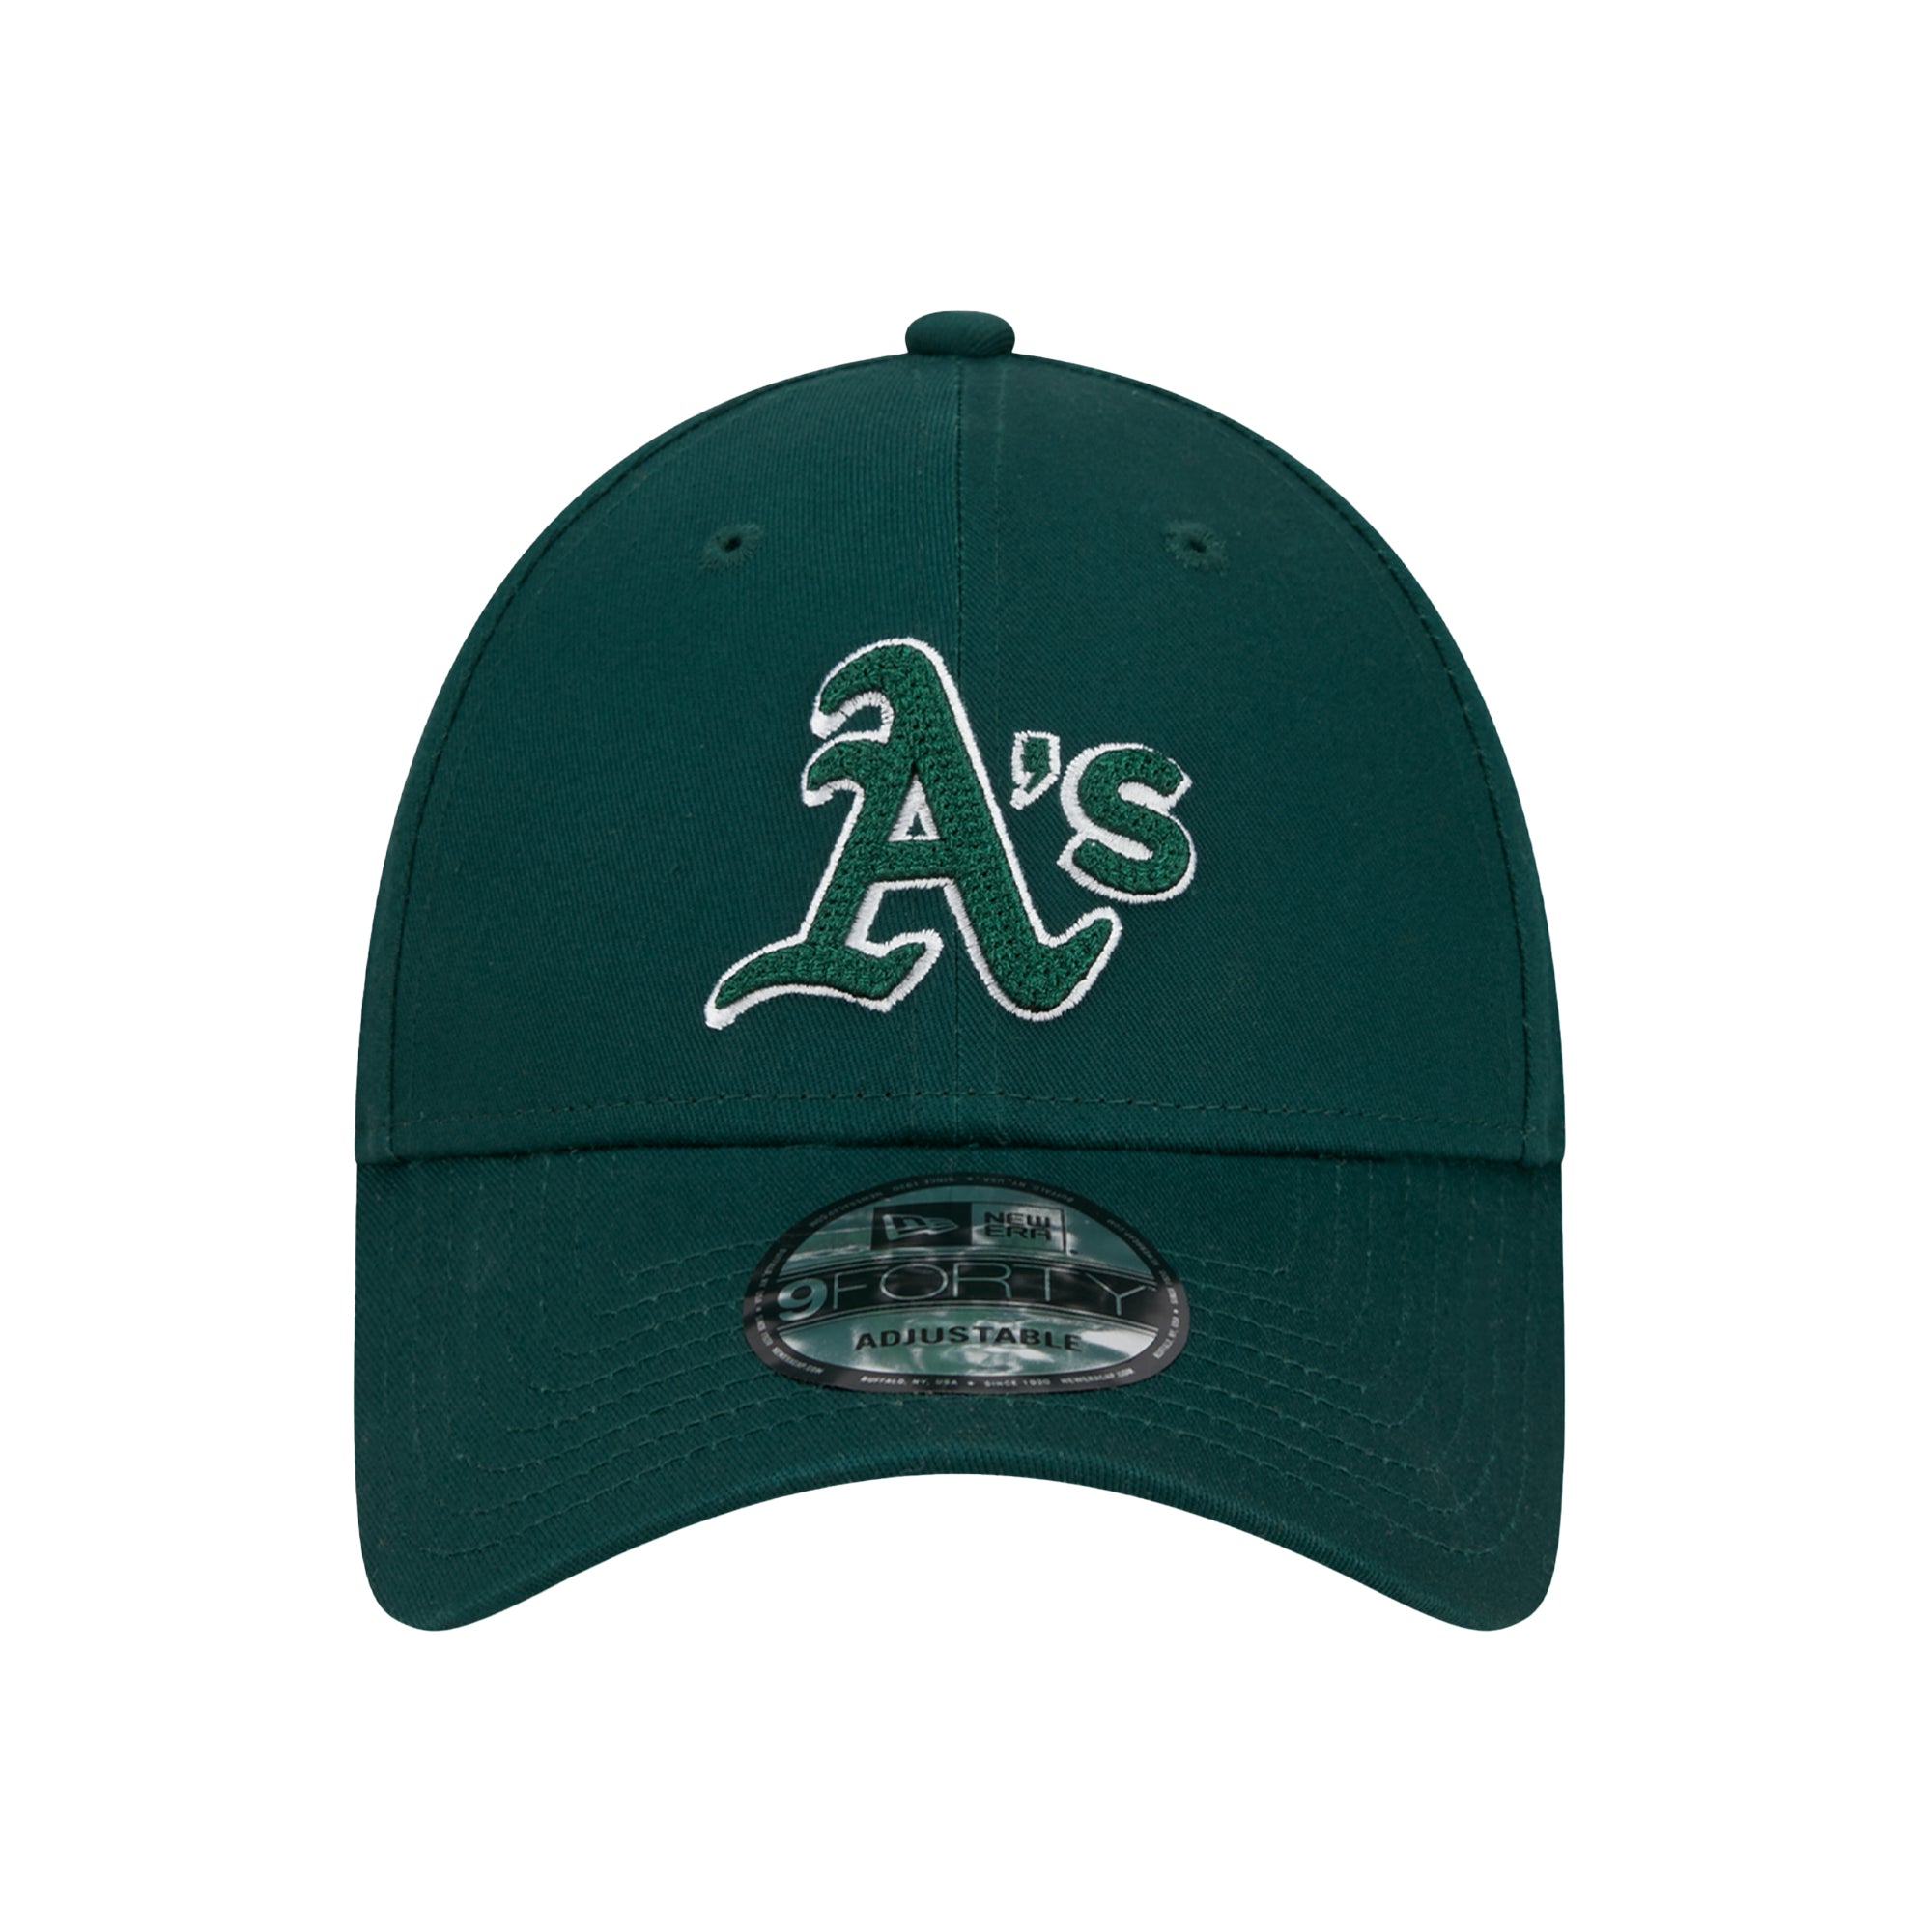 Oakland Athletics New Traditions Green 9FORTY Adjustable